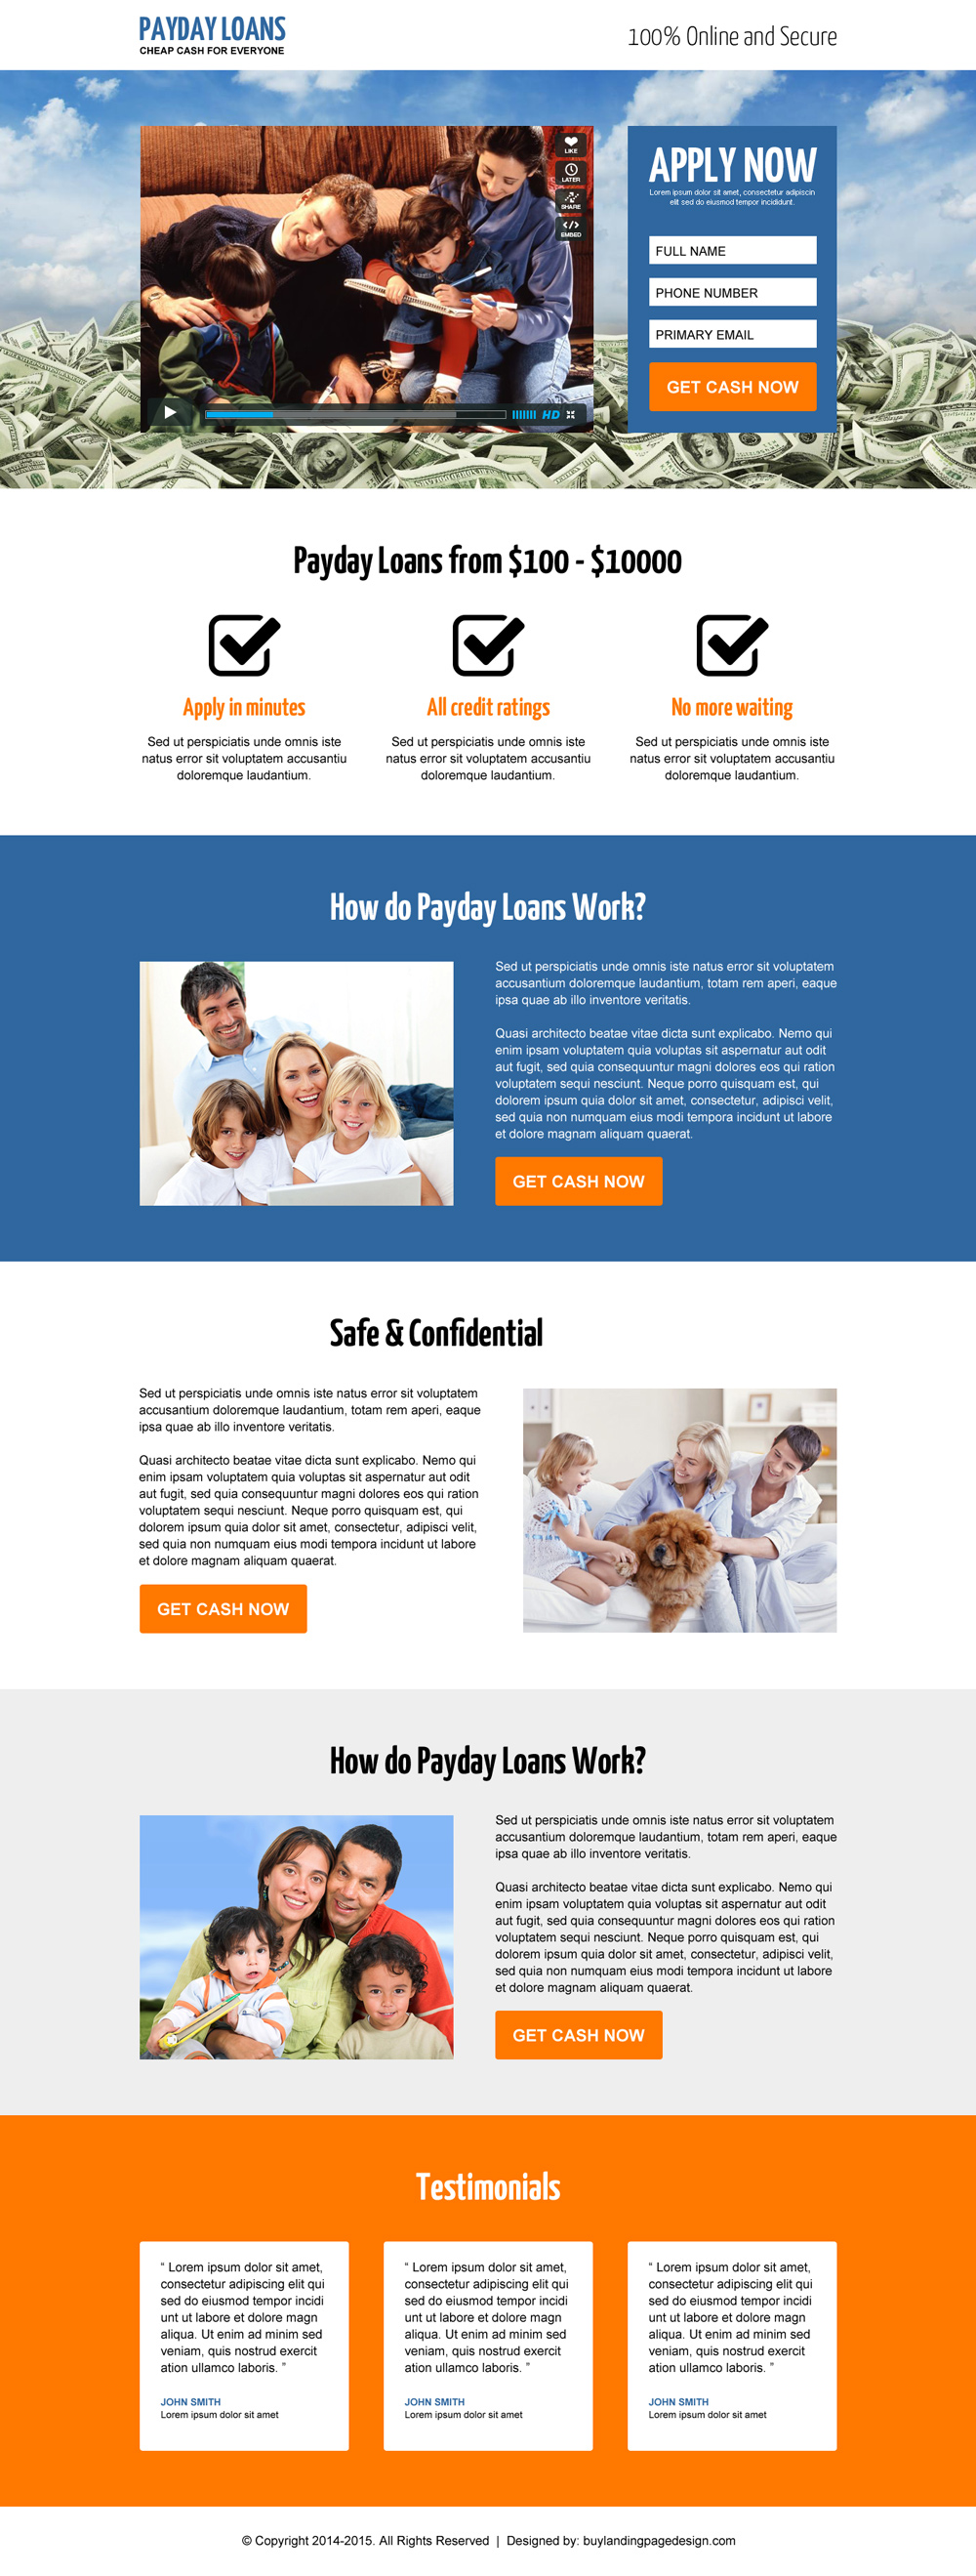 best-payday-loan-video-landing-page-design-template-to-capture-lead-and-increase-sales-021_1